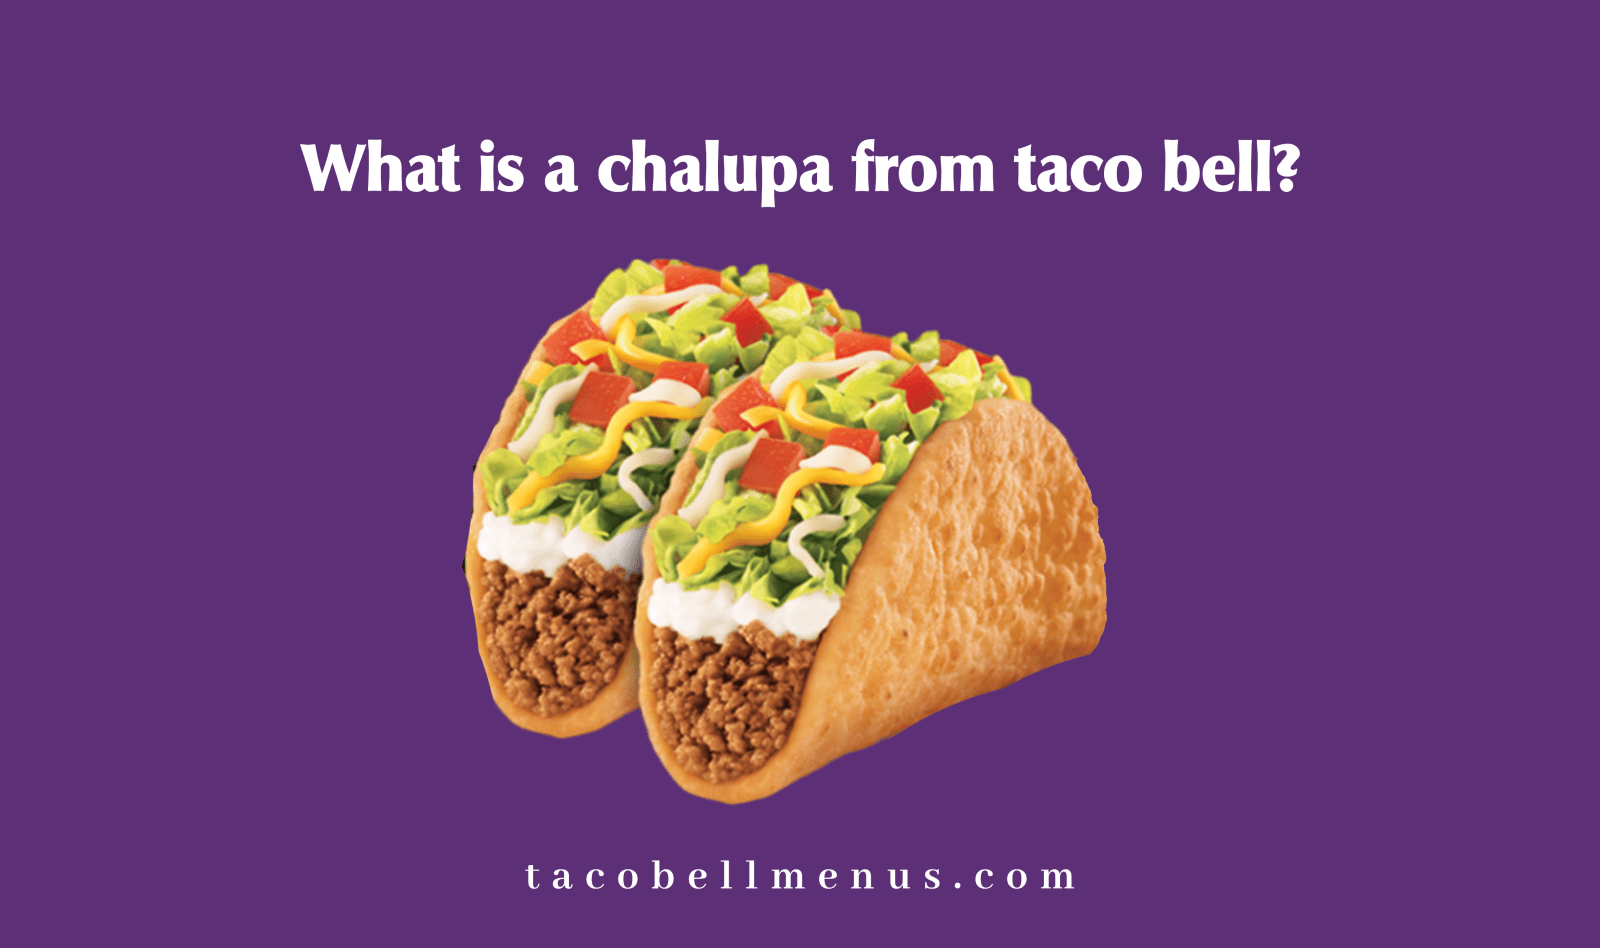 What is a chalupa from taco bell?